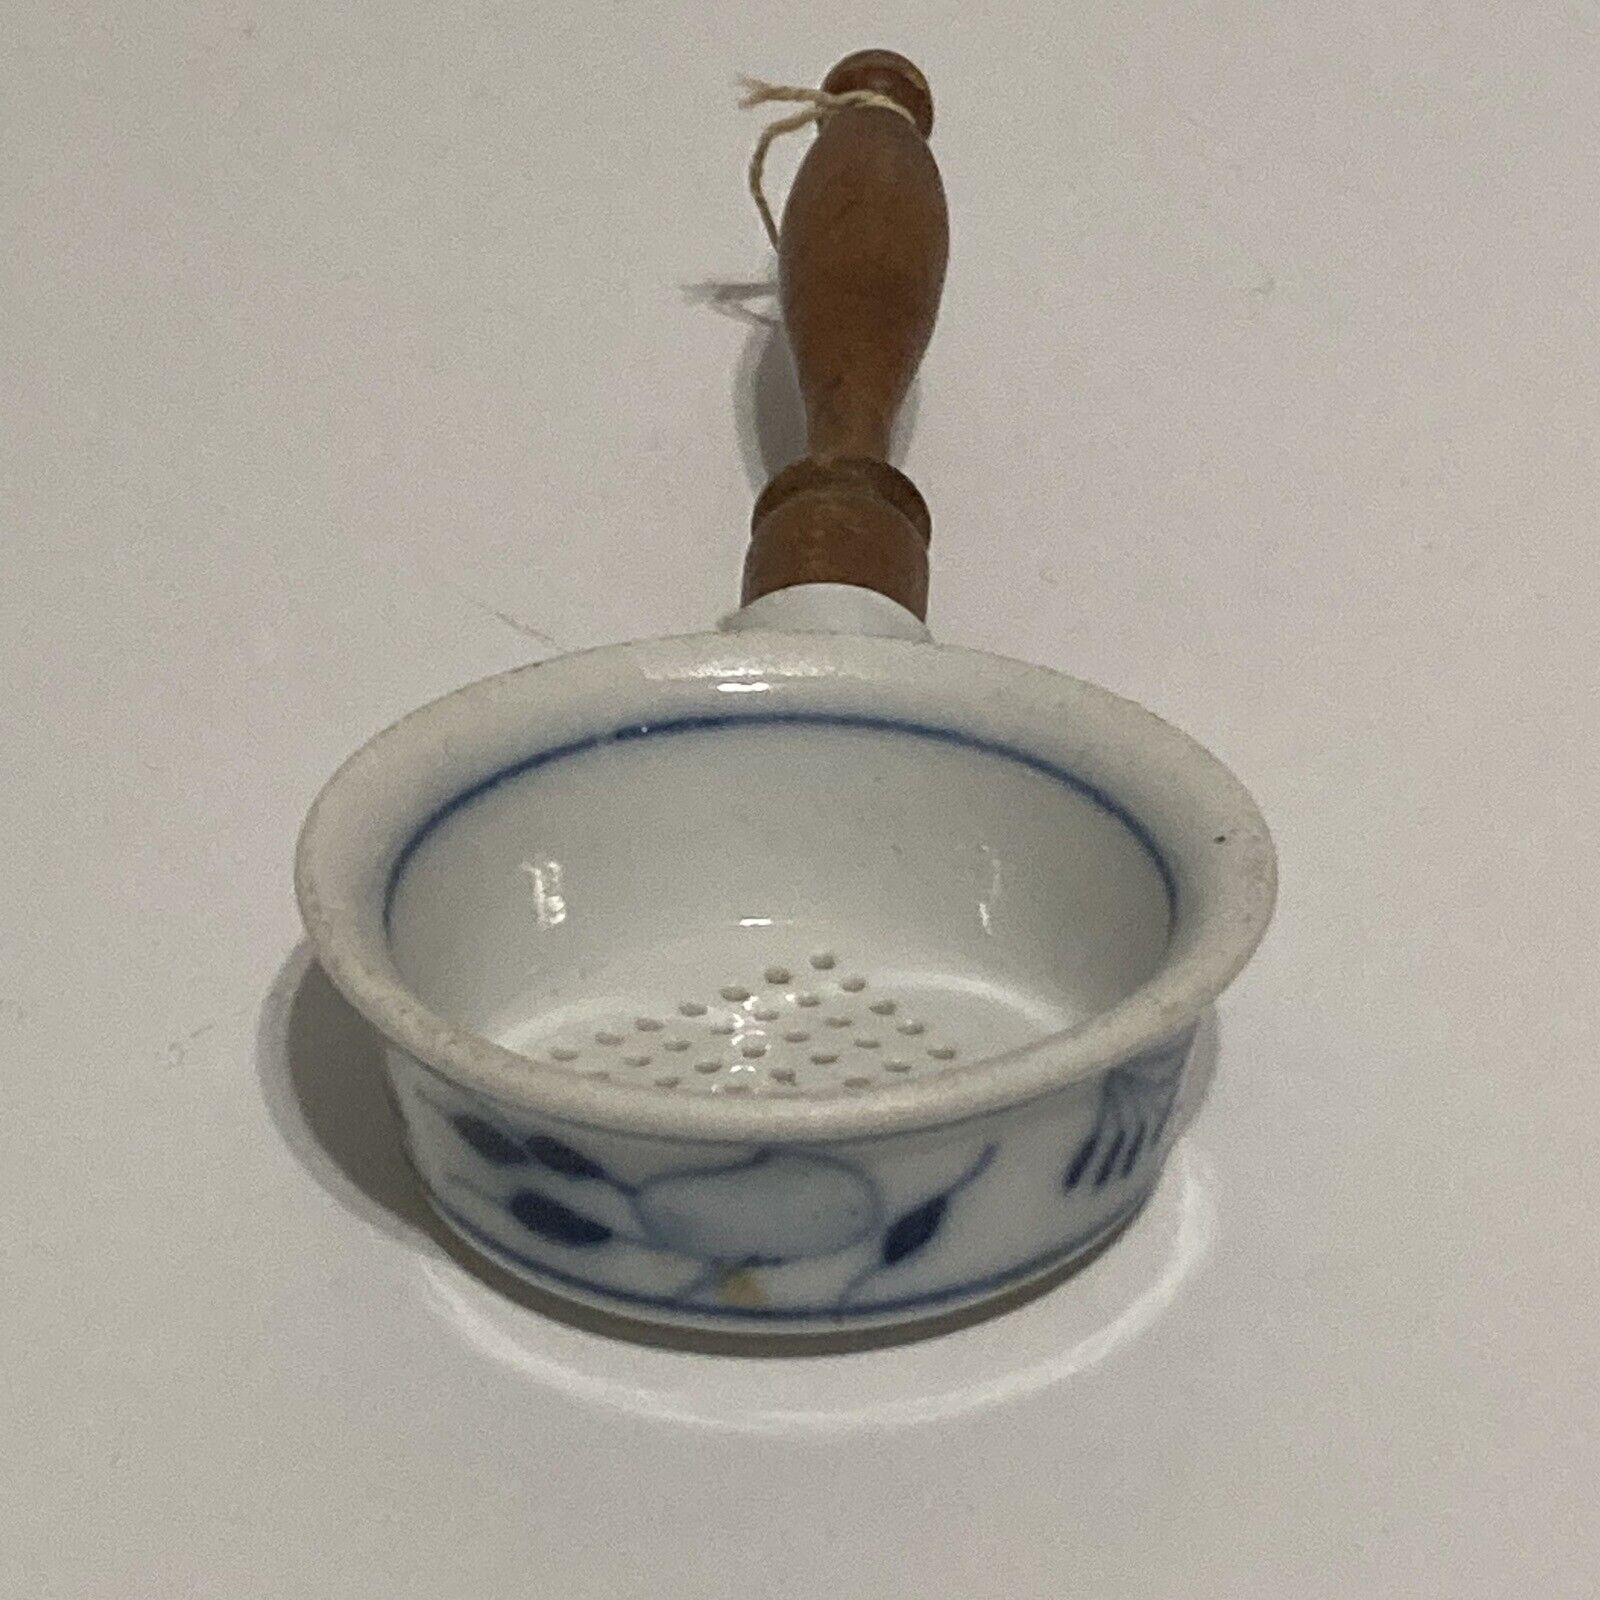 Antique Blue Onion Tea Strainer with Wood Handle